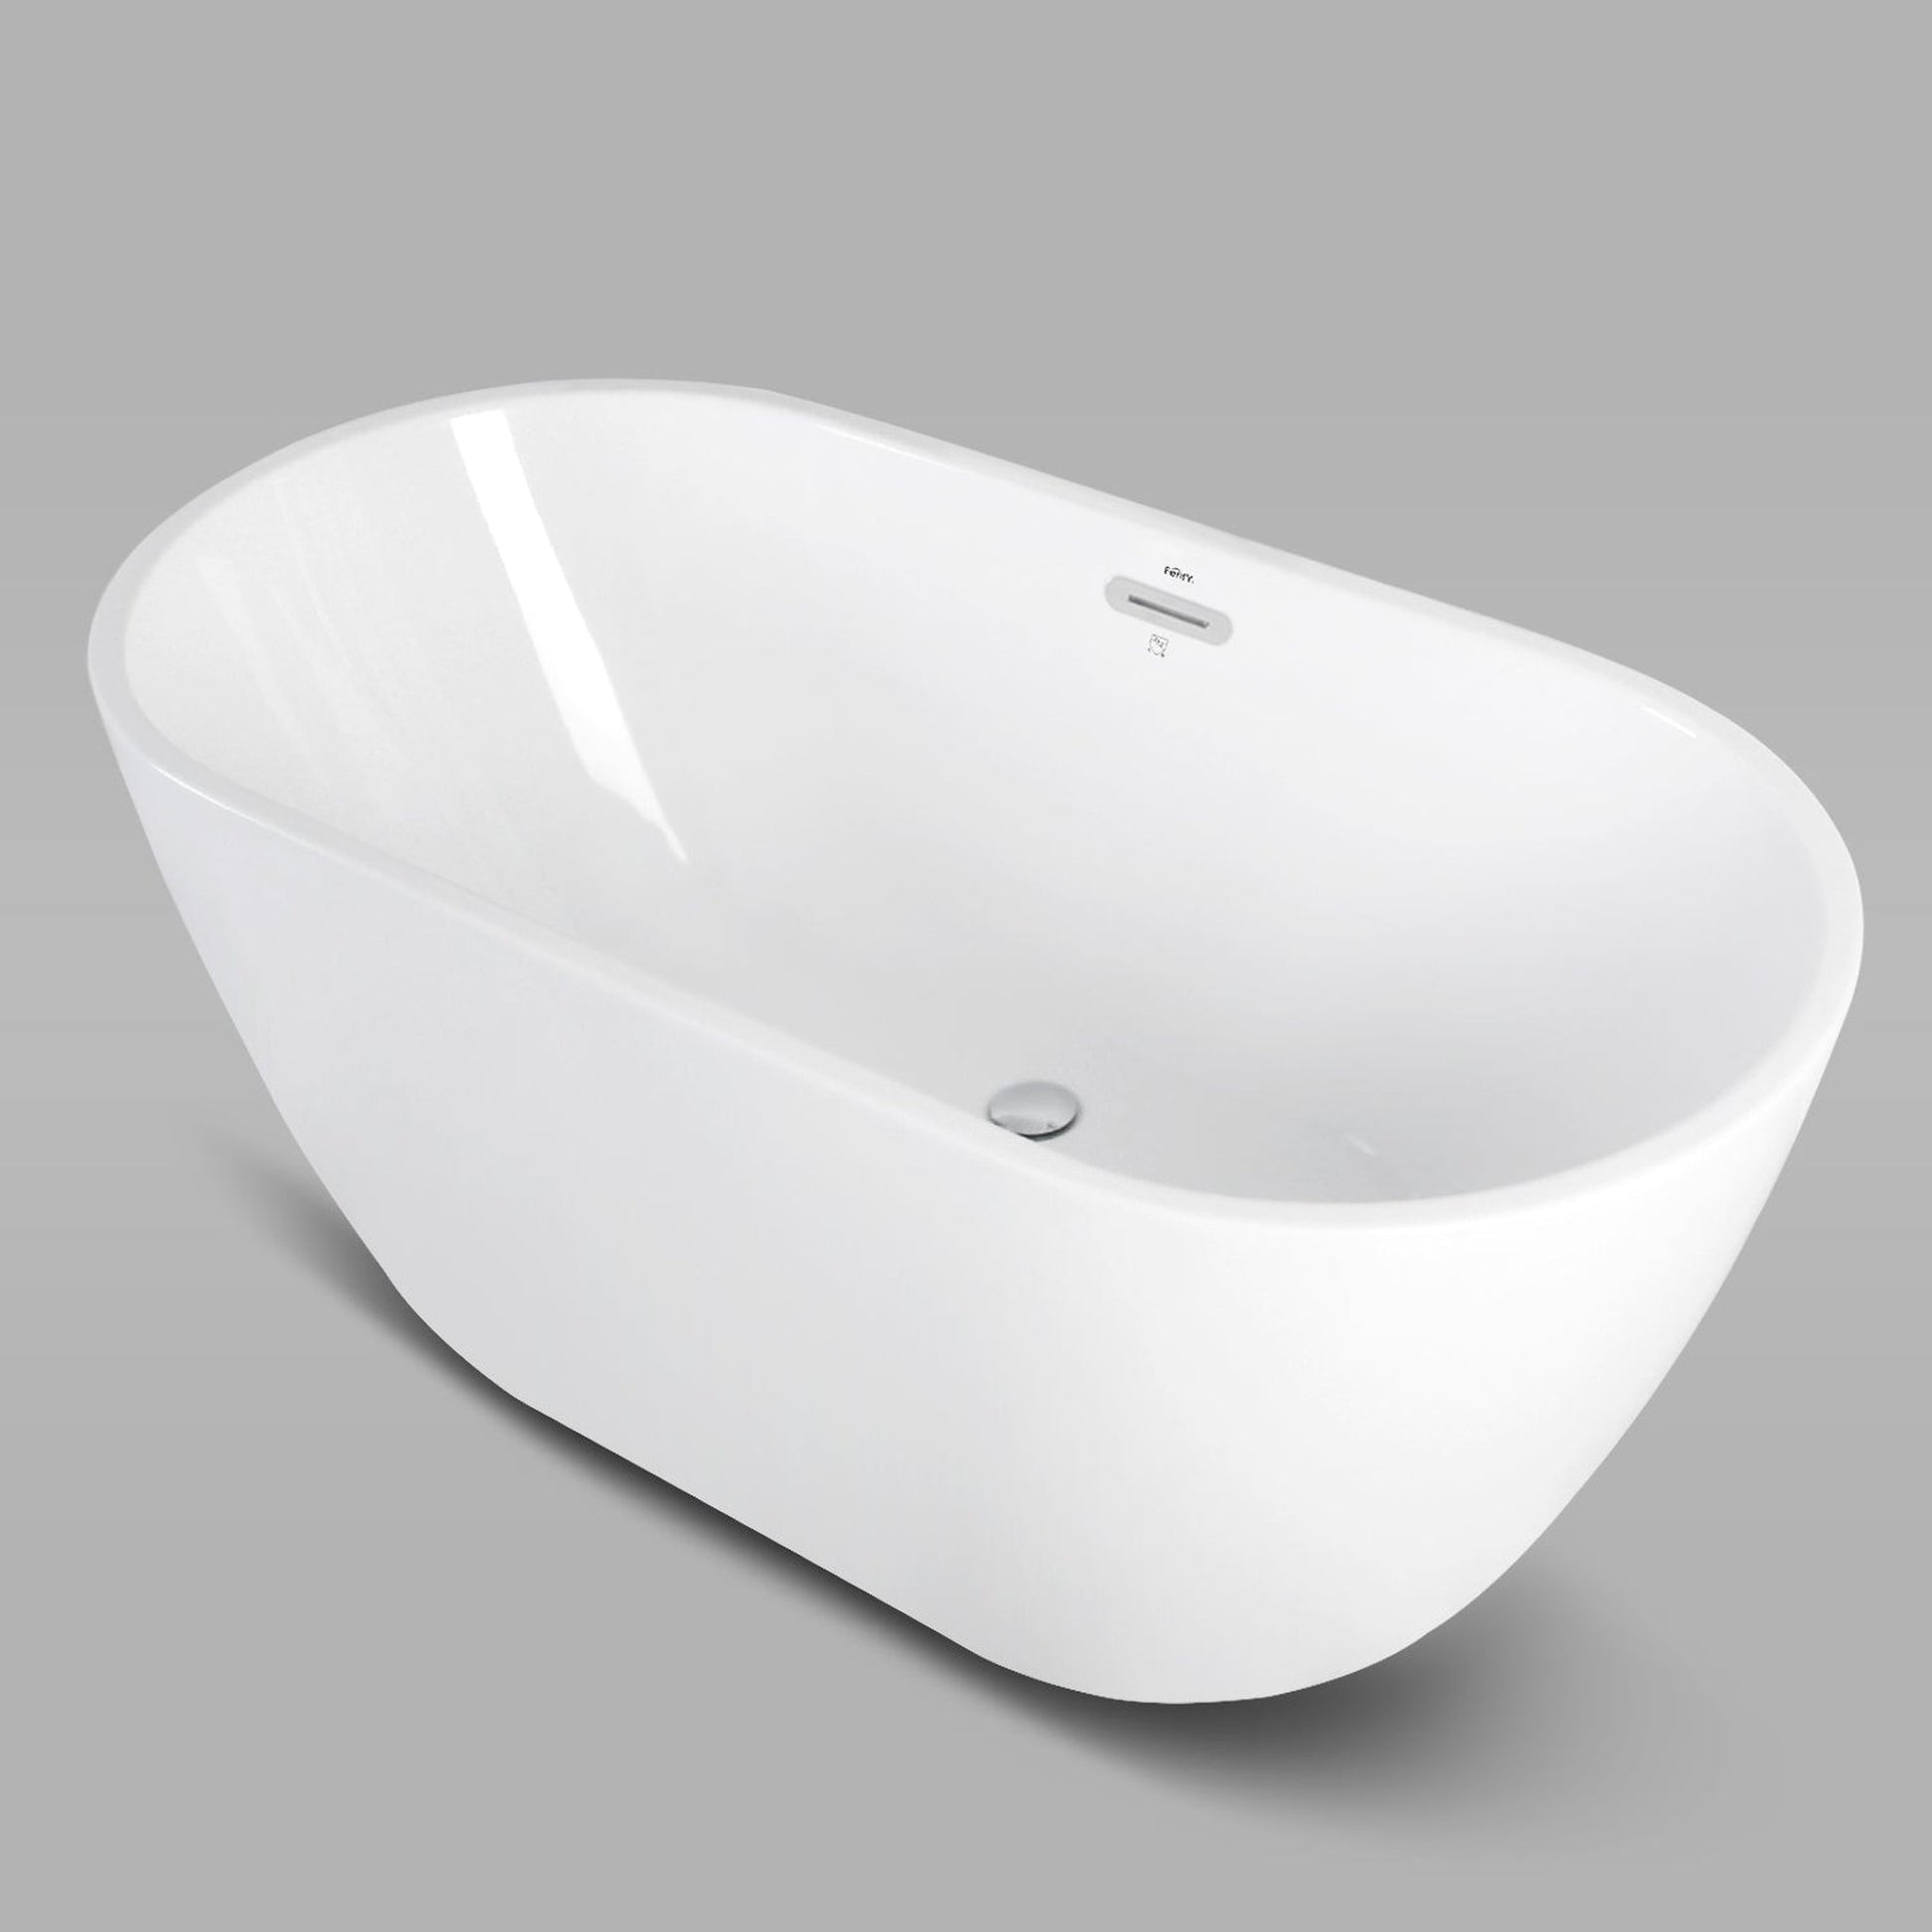 FerdY Bali 55" x 28" Oval Glossy White Acrylic Freestanding Roll Top Soaking Bathtub With Chrome Drain and Overflow